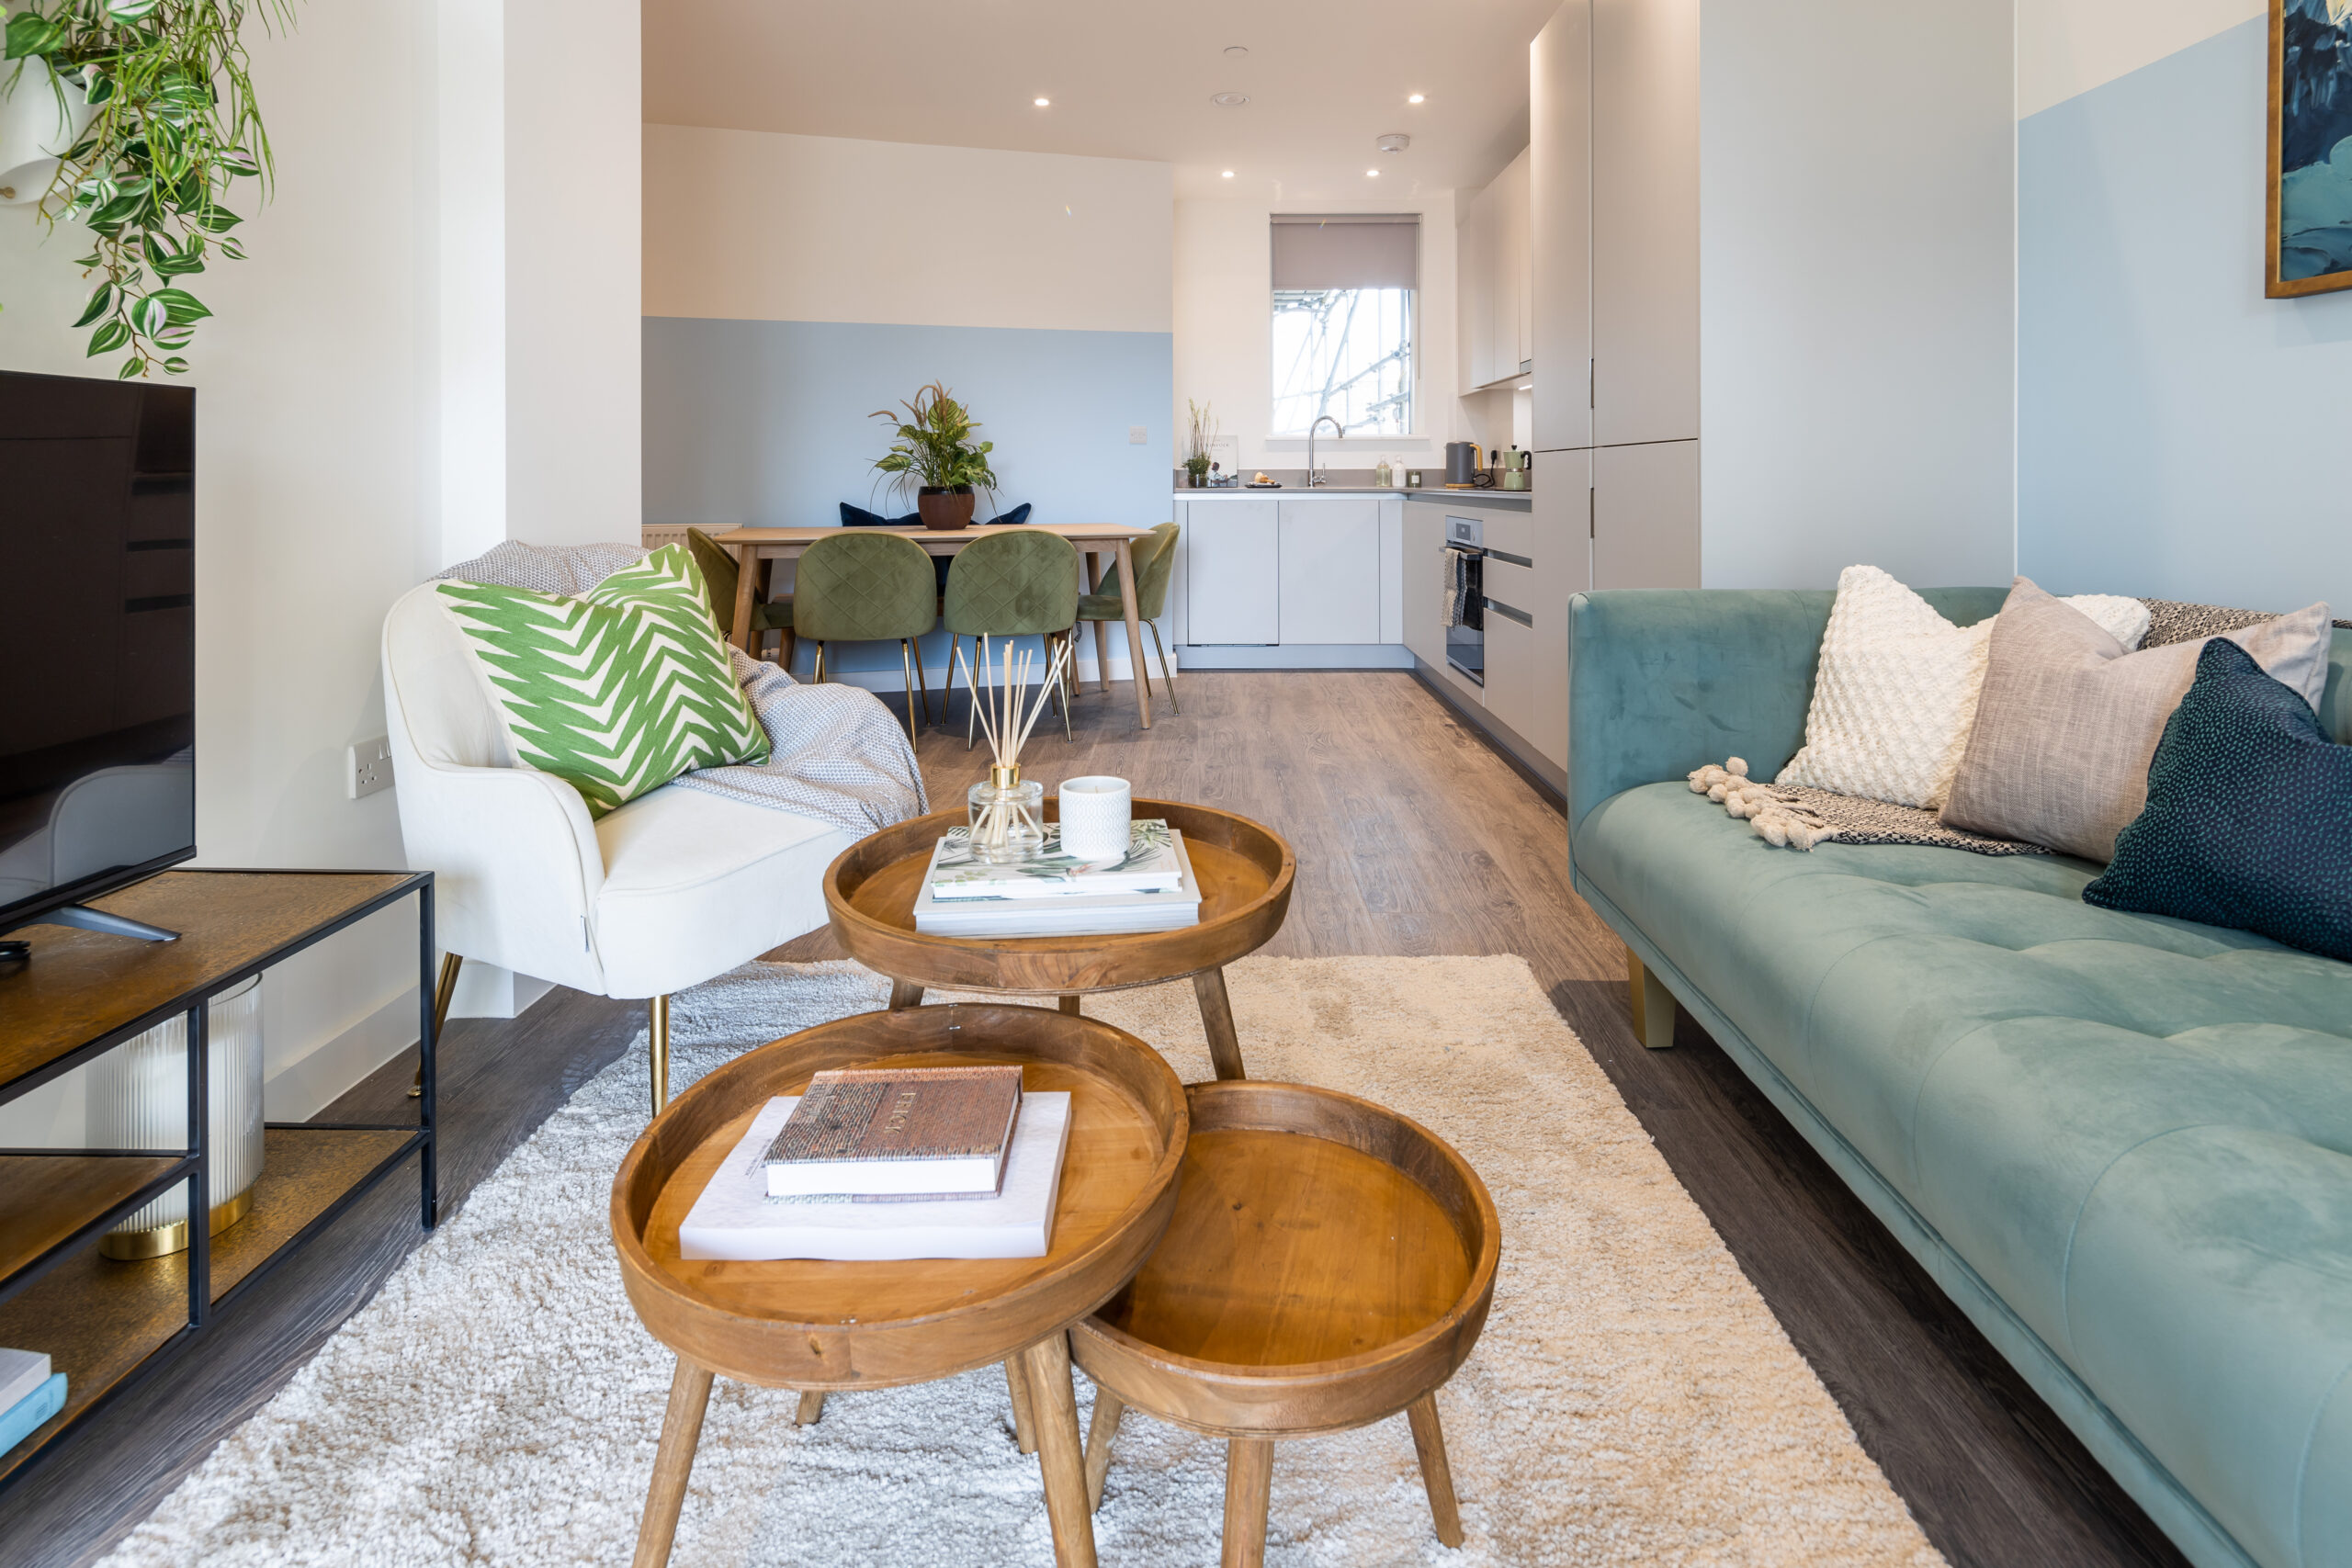 Lounge5-The-Moorings-Hounslow-Brentford-Shared-Ownership-2021-Legal-And-General-Affordable-Homes